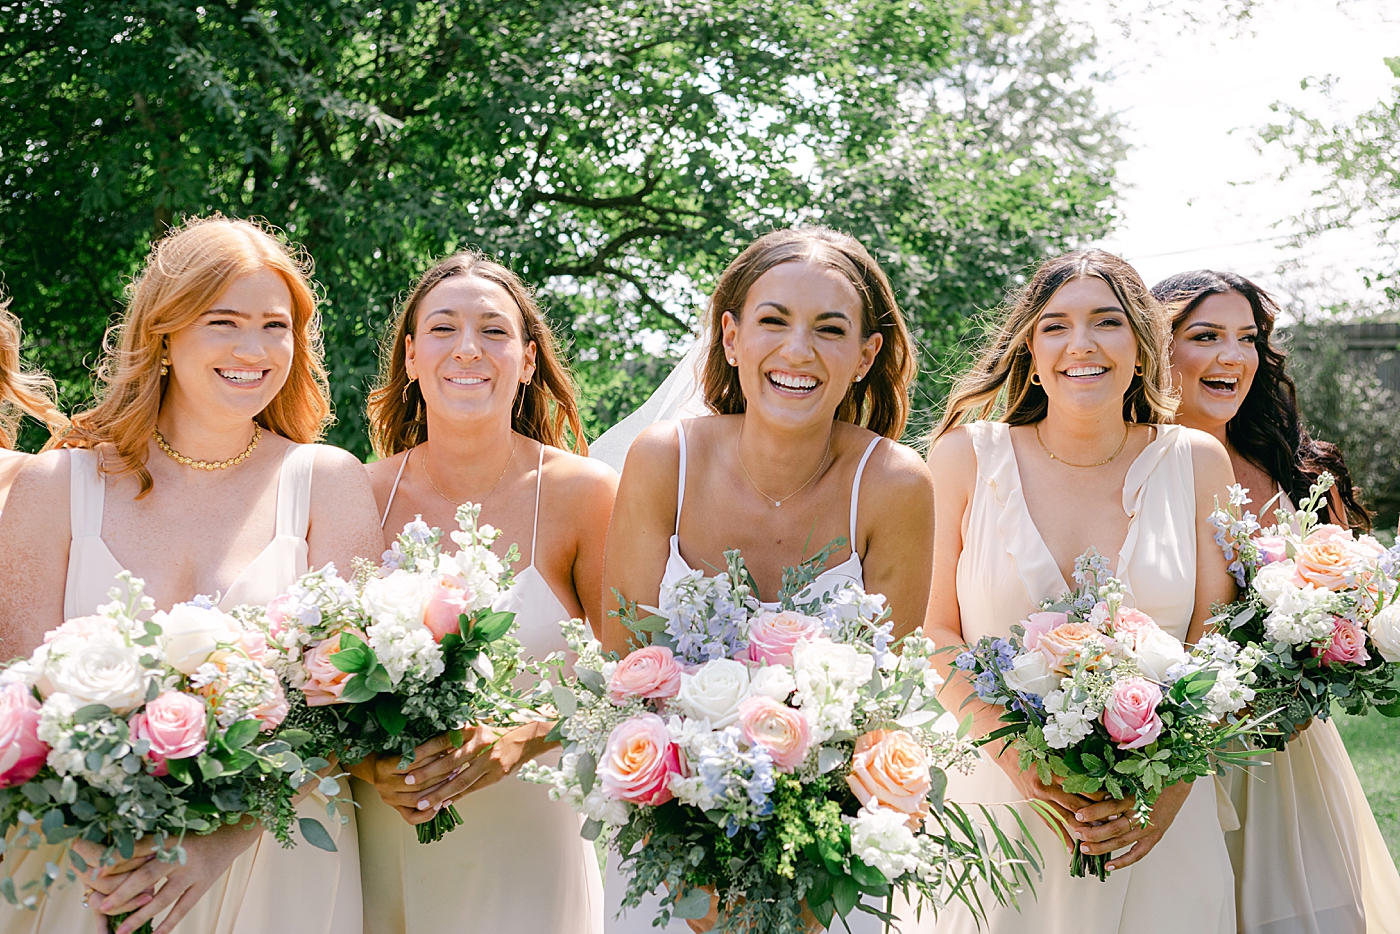 Bride laughing with her bridesmaids | Image by Hope Helmuth Photography